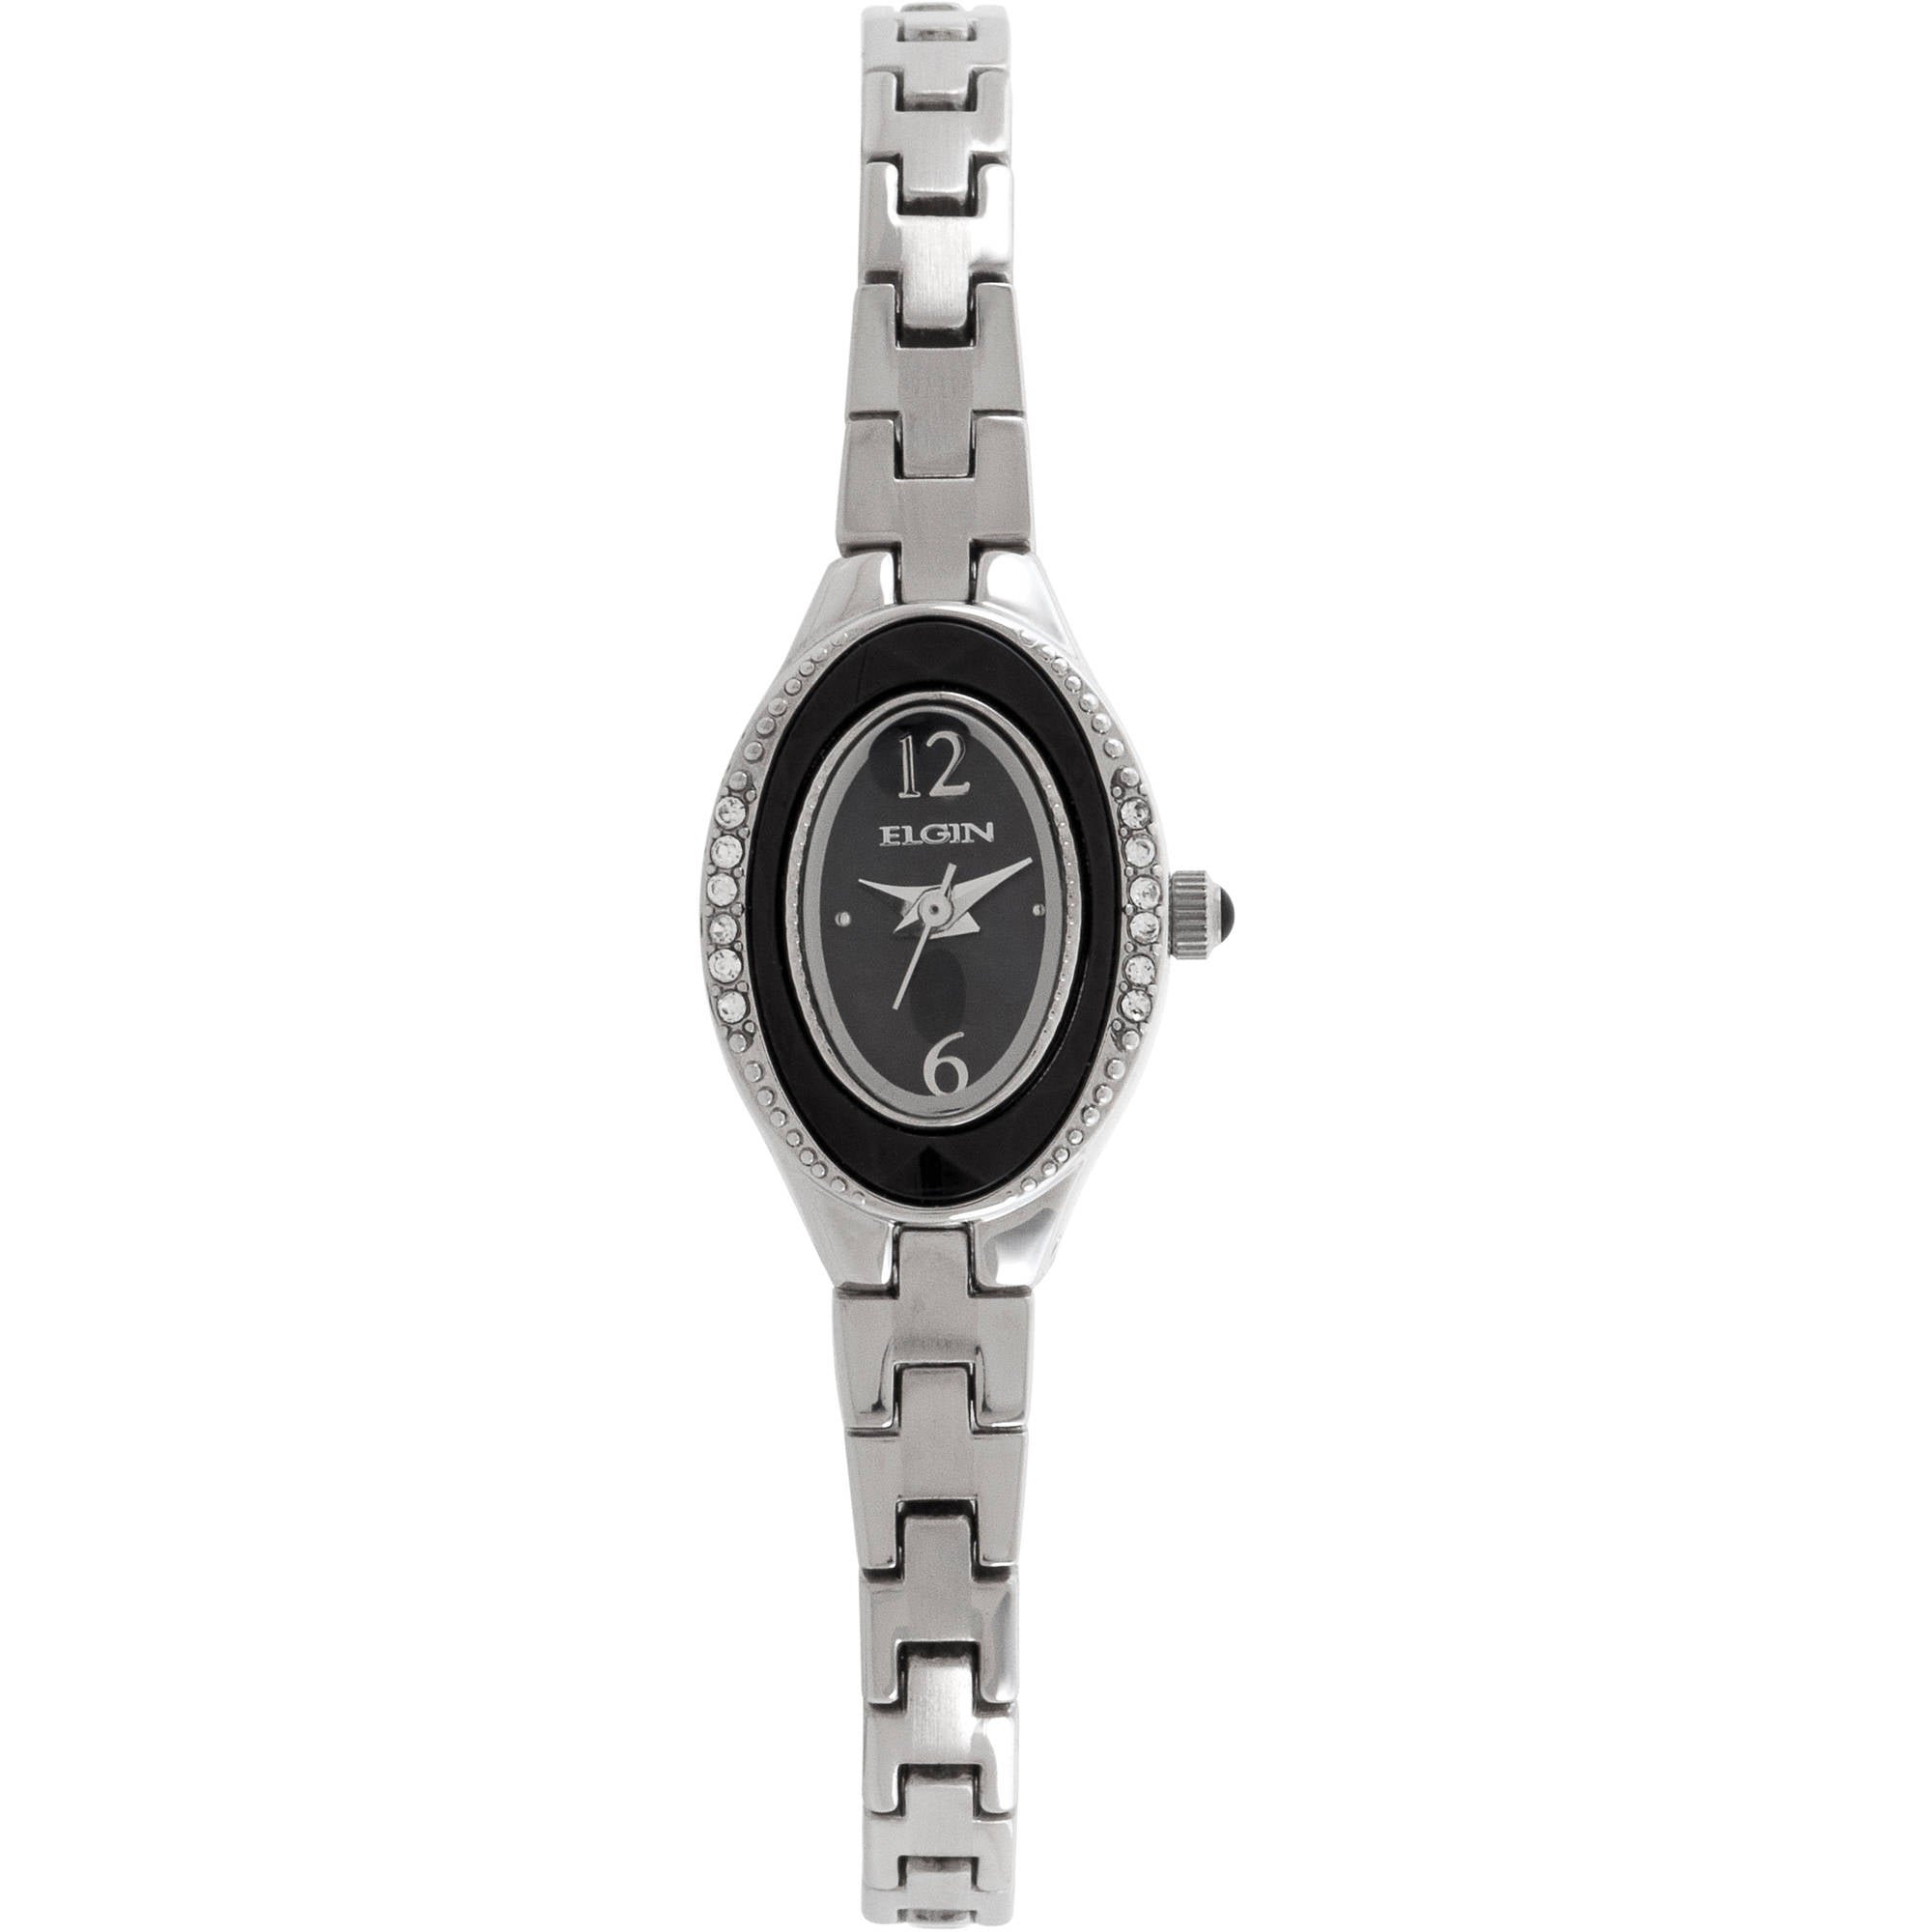 Model: Women's Elgin Bracelet Watch with Silver Oval Case and Black Dial with Czech Crystal